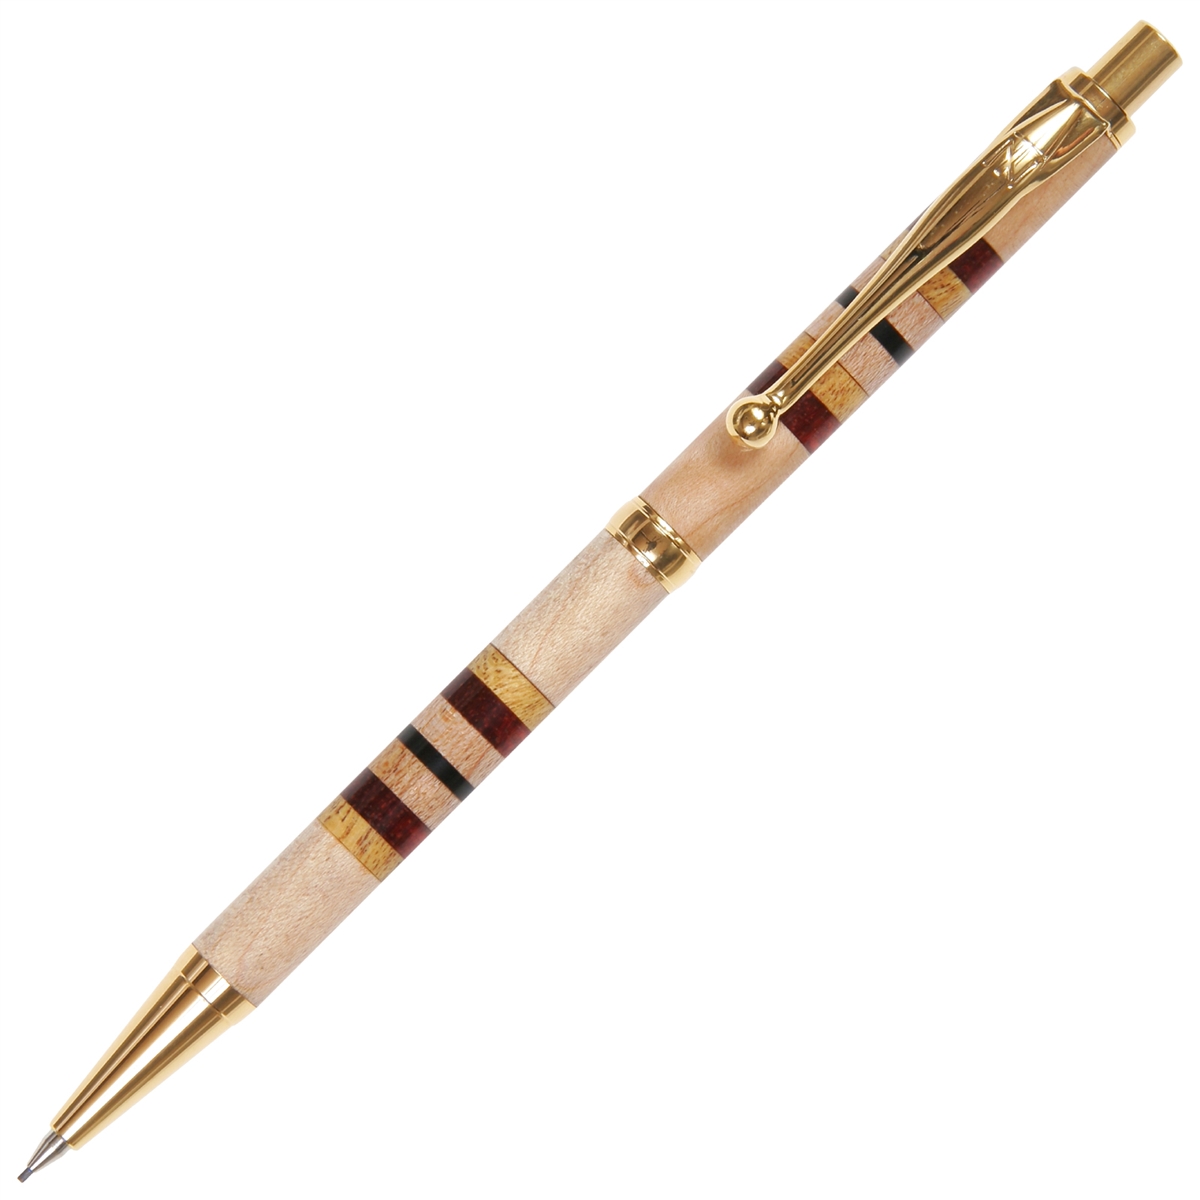 Slimline Pencil - Maple with Yellowheart, Red Heart and Ebony Inlays